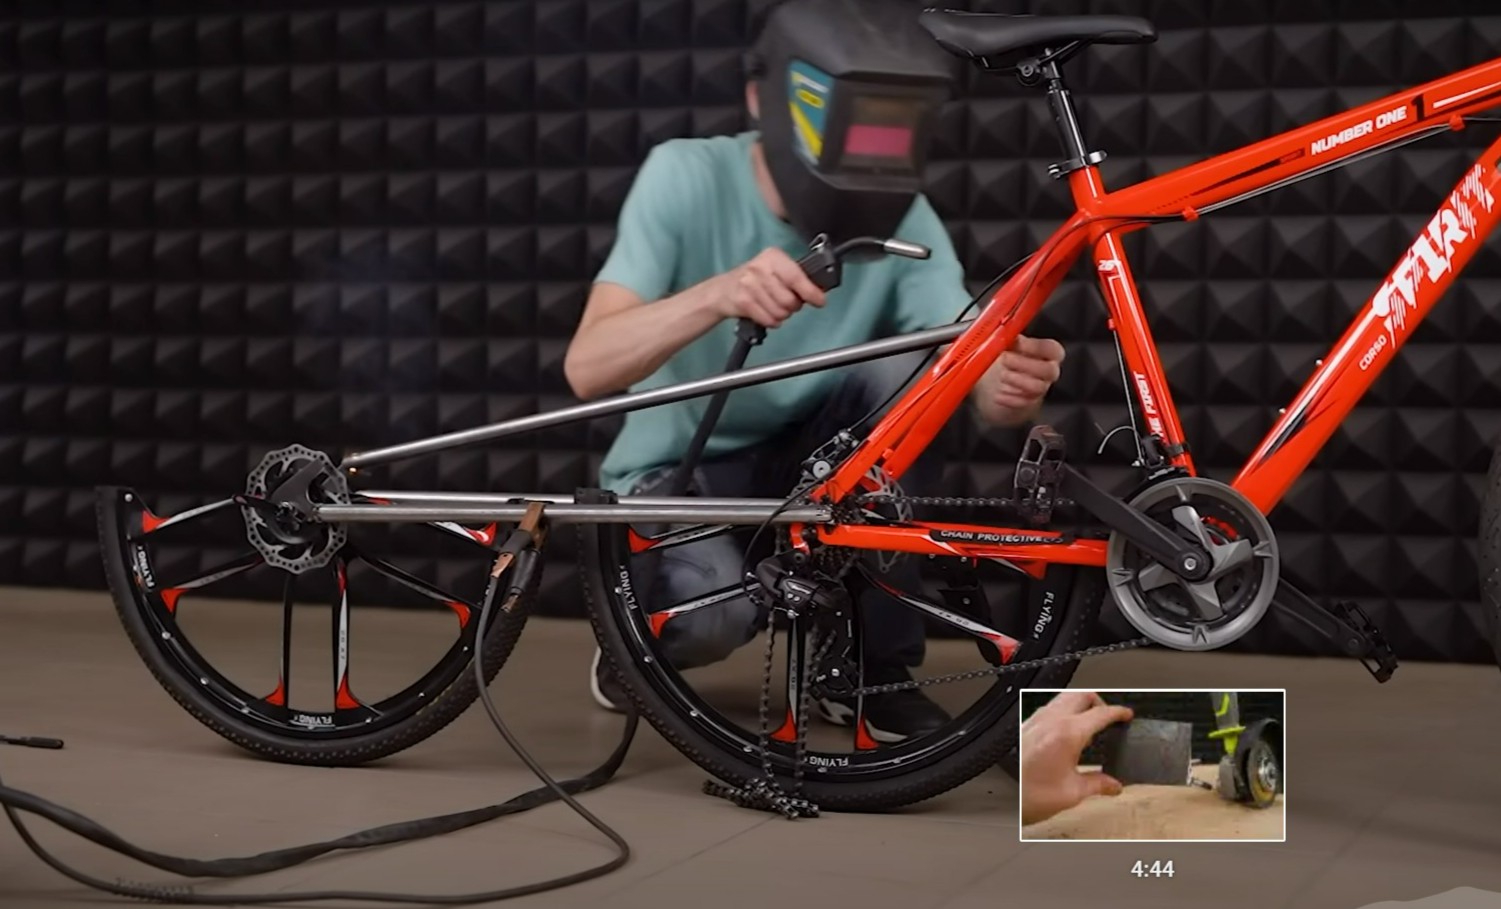 the wonders of mathematics are responsible for functional one off designs like this bike 6